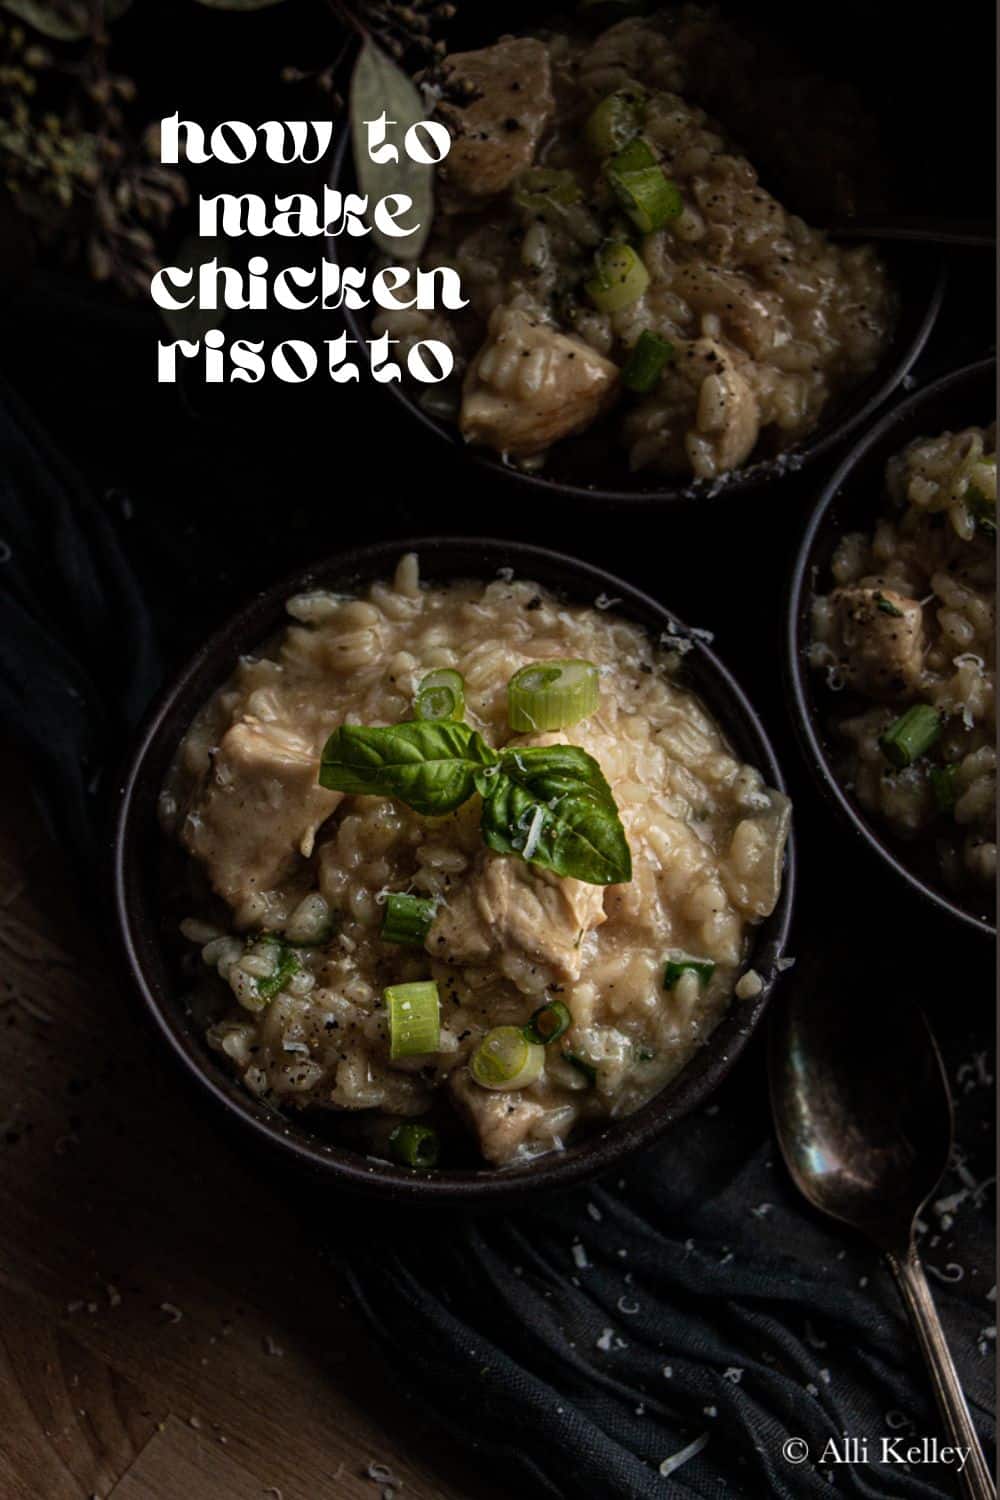 If you're looking for a delicious weeknight dinner, you have to try this chicken risotto recipe! Flavorful and packed with tender chicken - this creamy chicken risotto recipe is pure comfort food at its finest! In just 30 minutes, you can have this delicious meal on the table in no time.